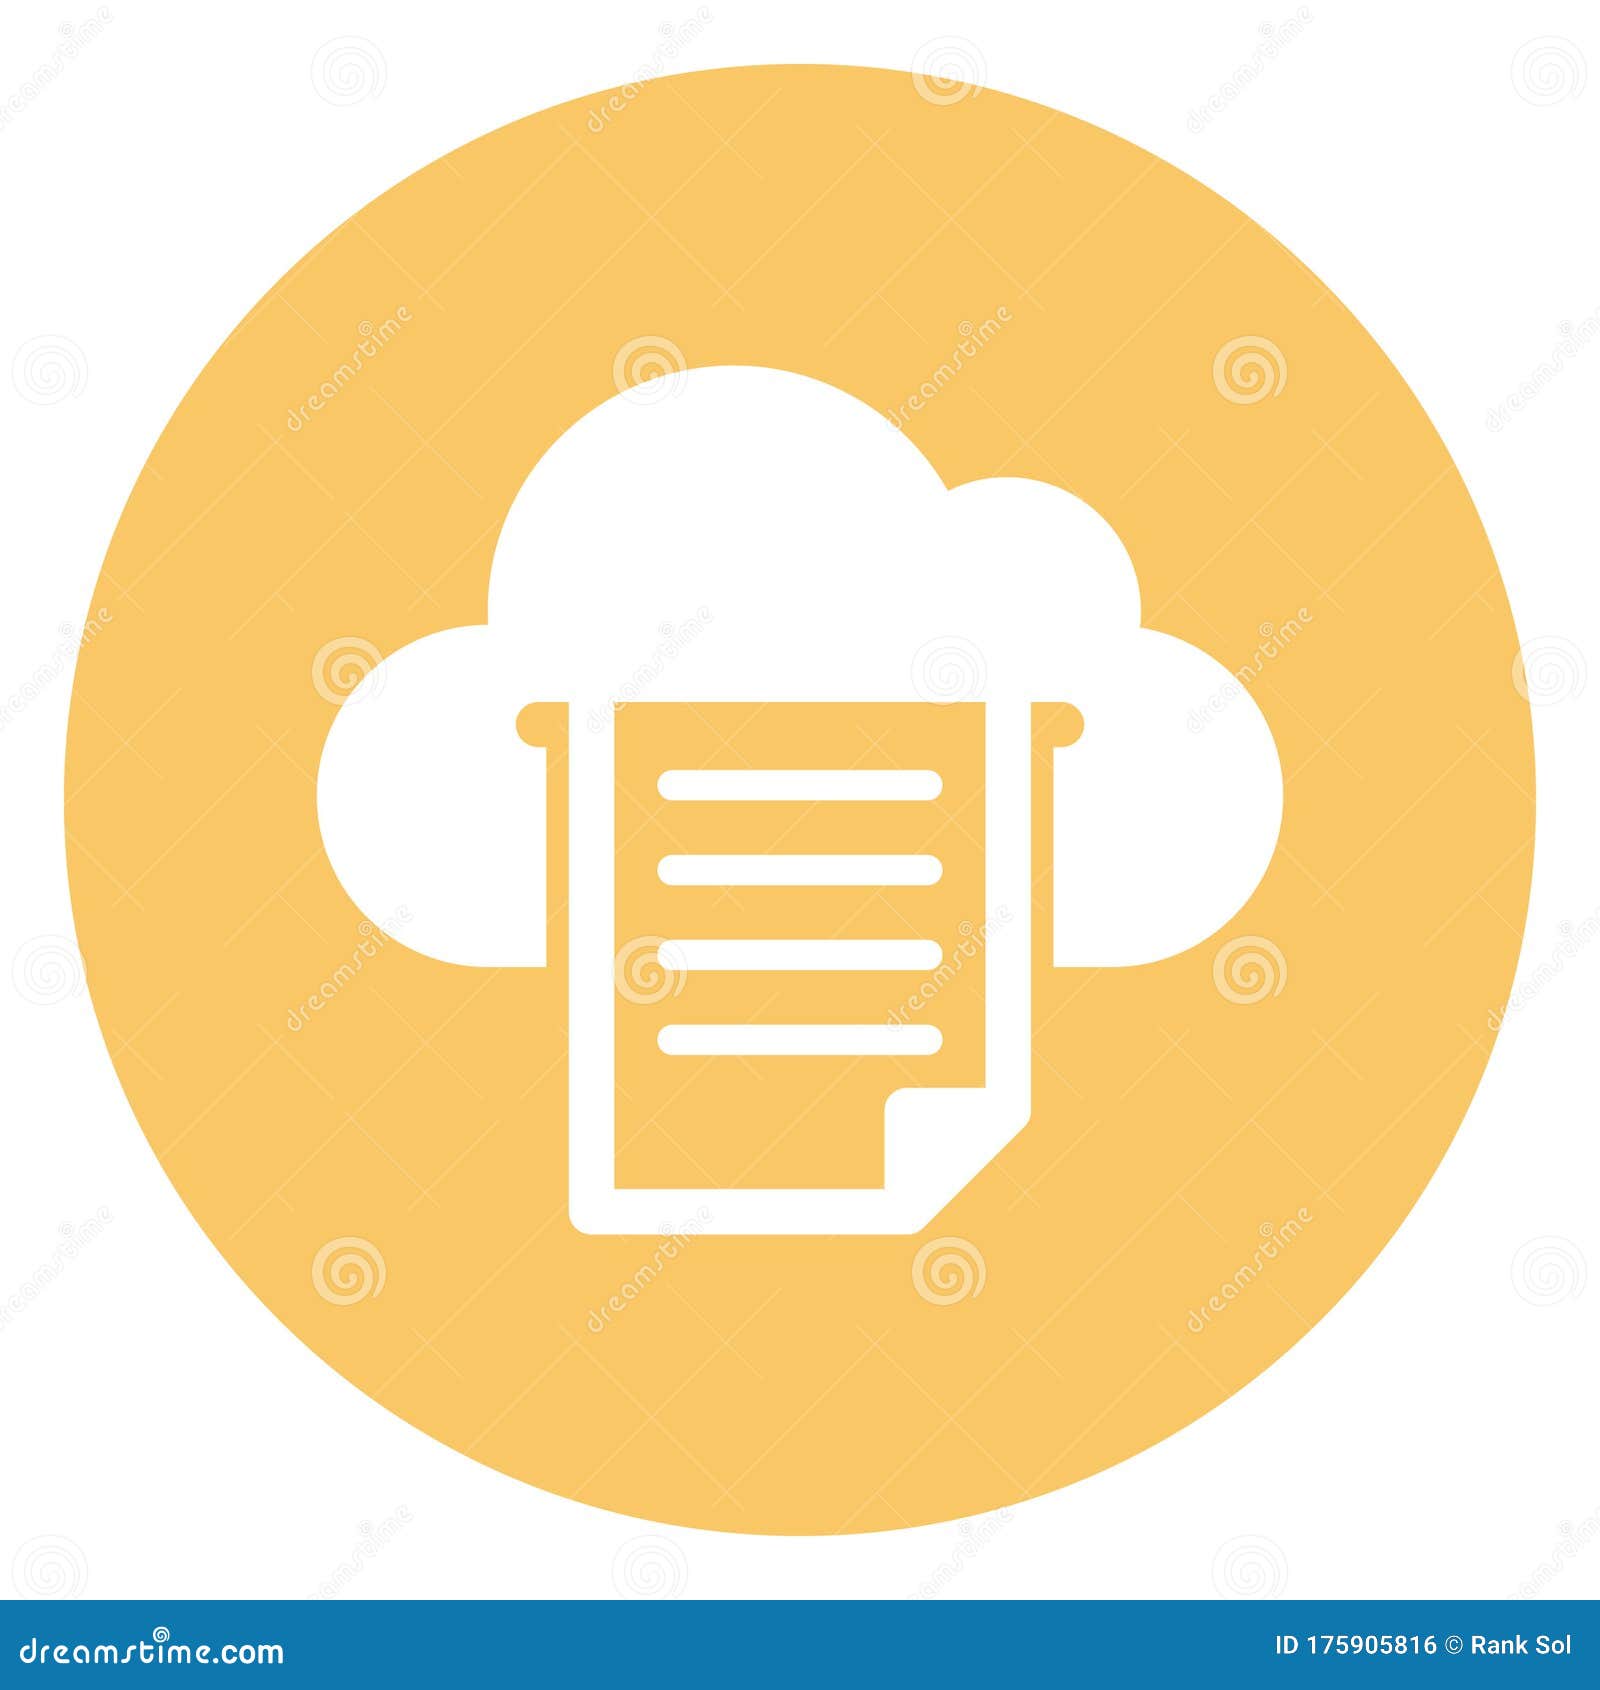 cloud-paper-cloud-print-vector-icon-which-can-easily-modify-stock